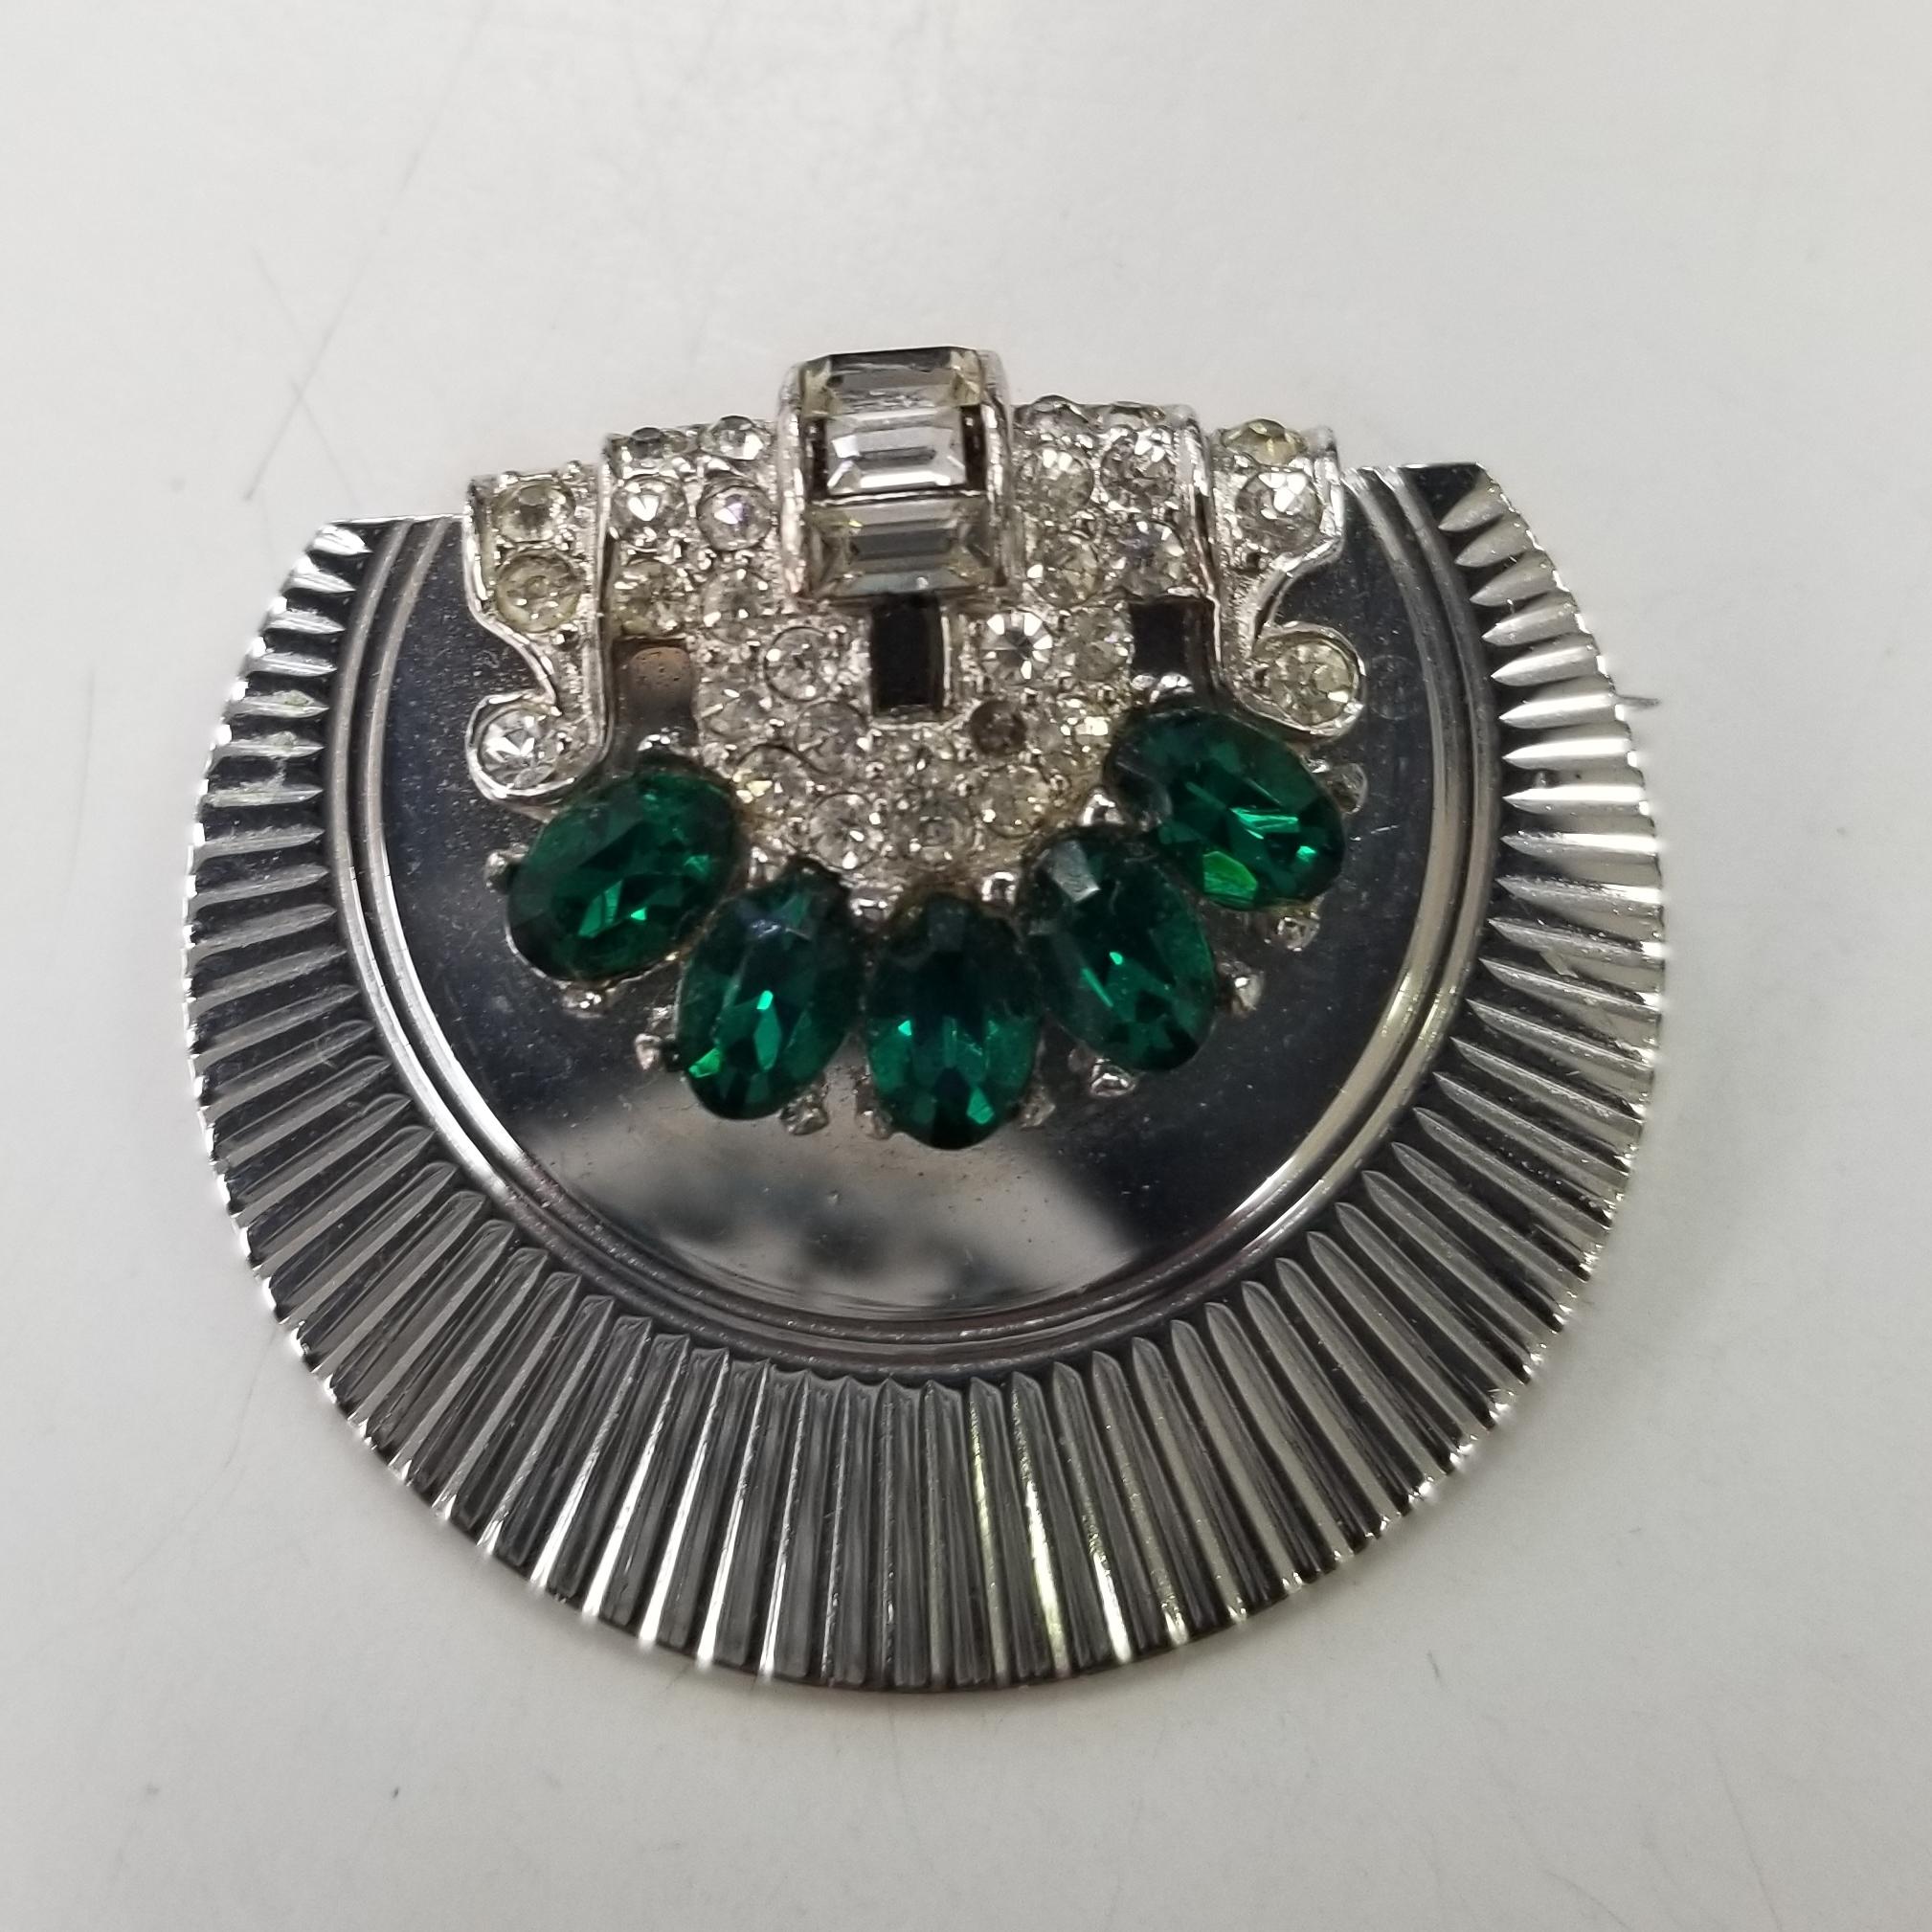 Vintage CIRO Green Rhinestone fan Brooch and Earring set, Signed PAT PEND Clip On, 1950s Costume Jewelry